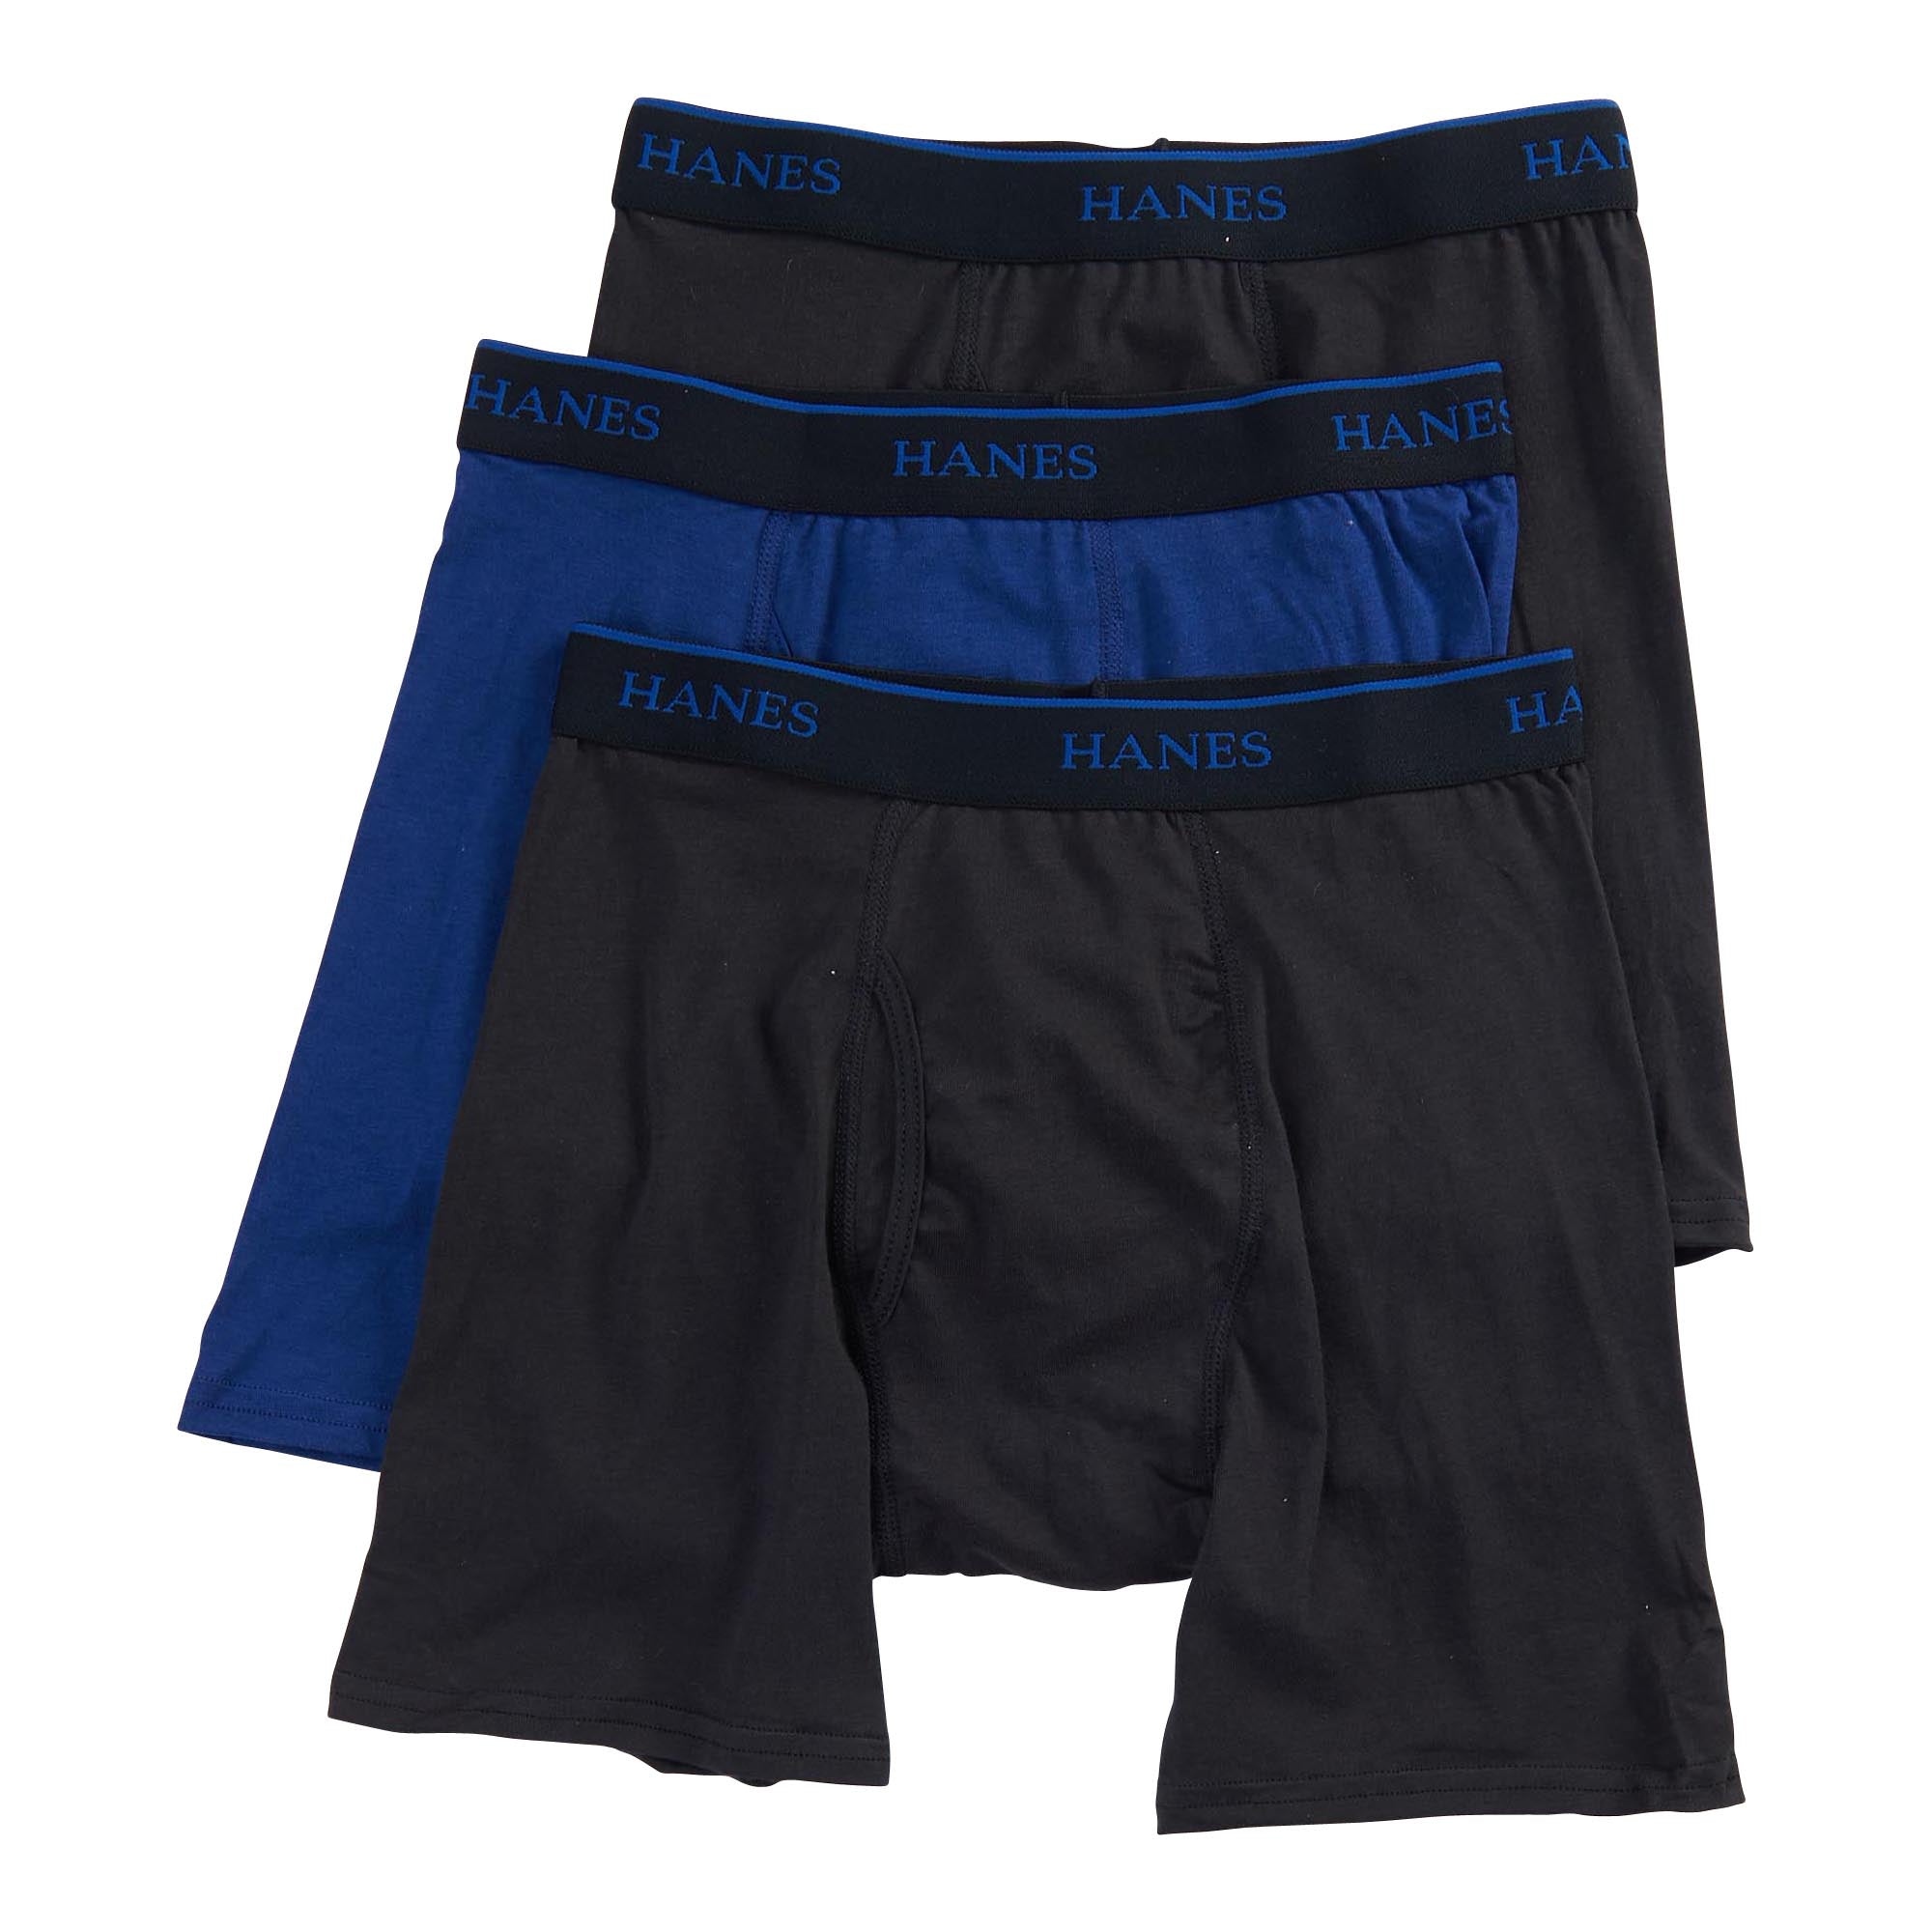 Hanes Men's Luxury Soft Mid-Rise Boxer Briefs with Comfort